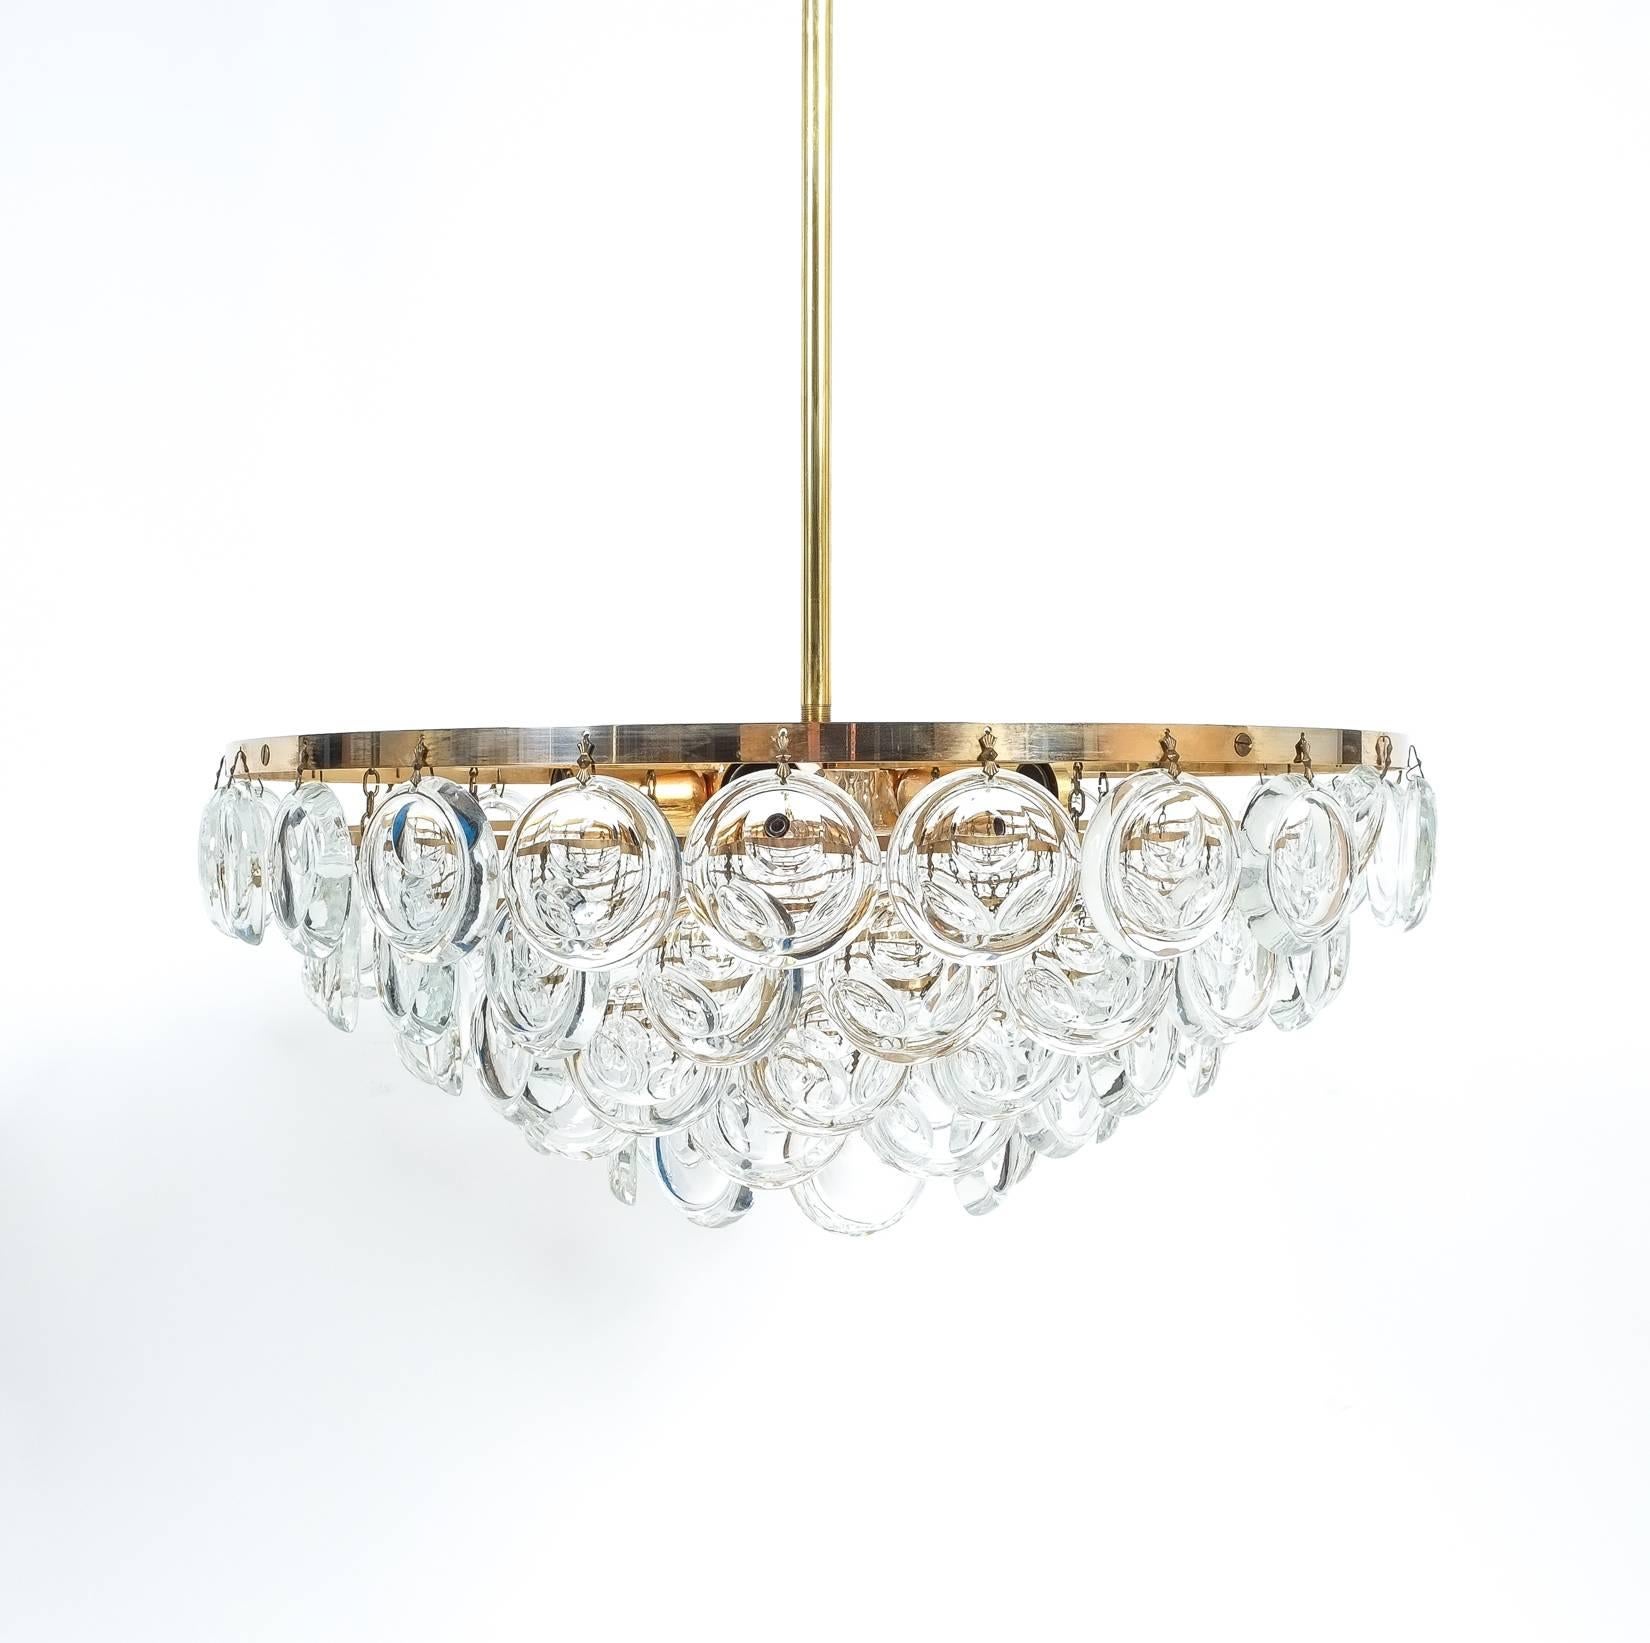 Elegant chandelier by Sciolari, Italy, circa 1960. This piece was produced in the same time as many of the Palwa lights from Germany and bear some similarity to the design. It features smooth jewel like optical crystals and polished brass rings. It